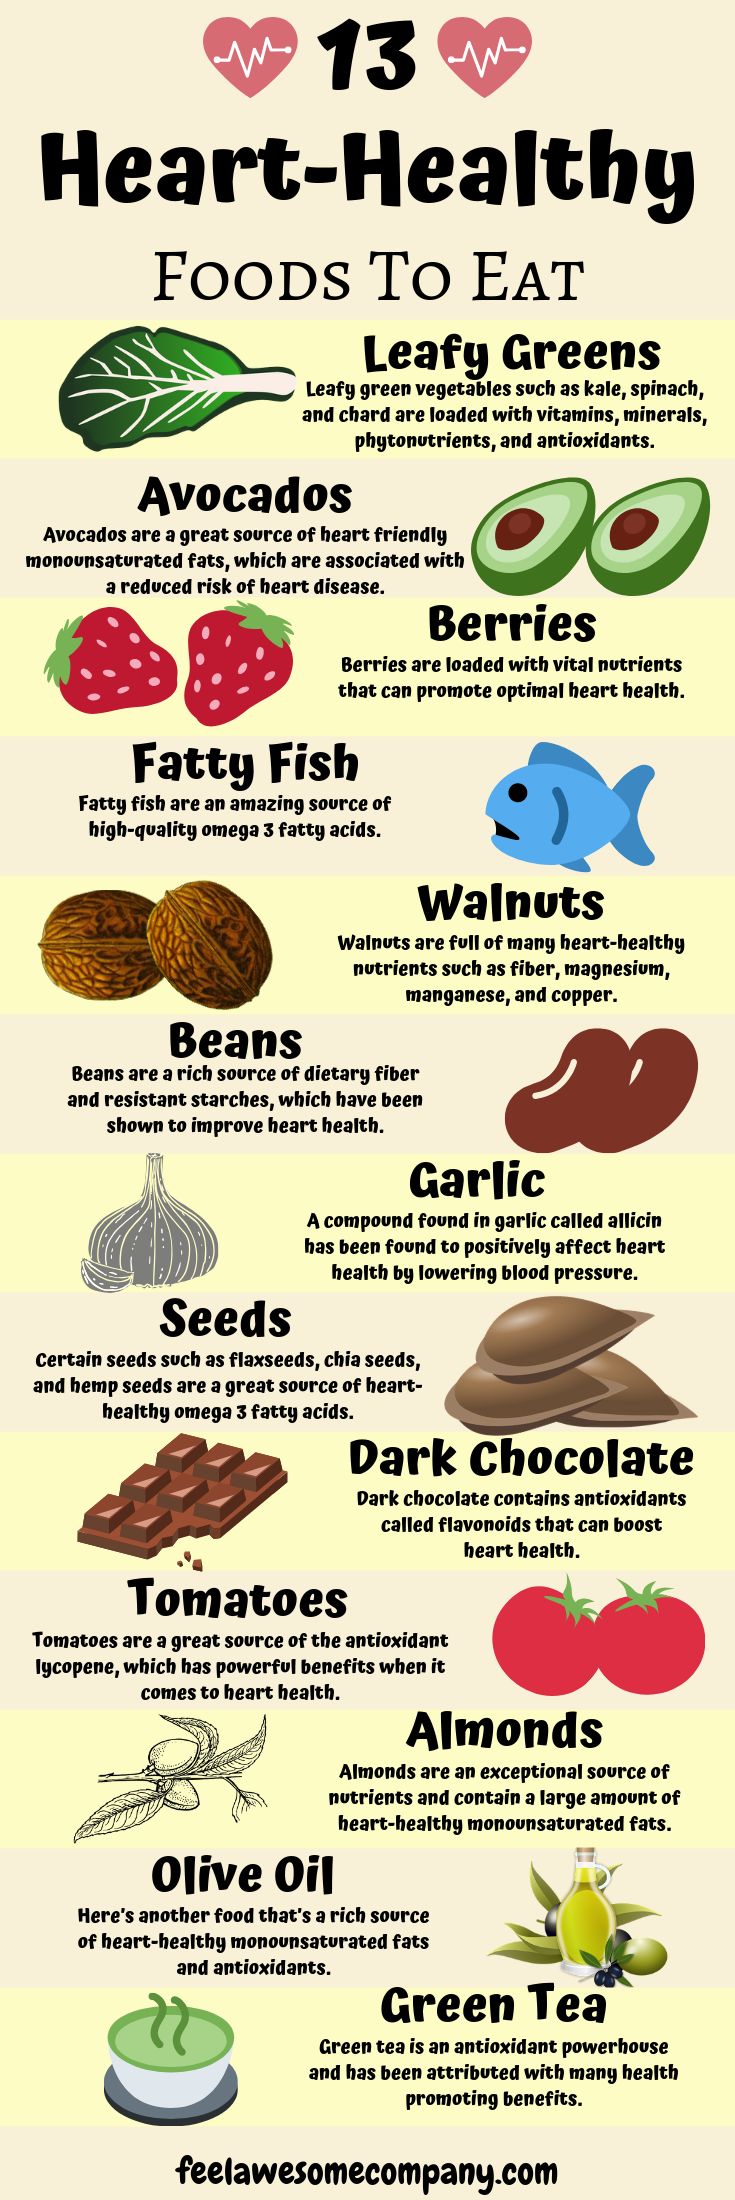 food-infographic-13-heart-healthy-foods-you-should-eat